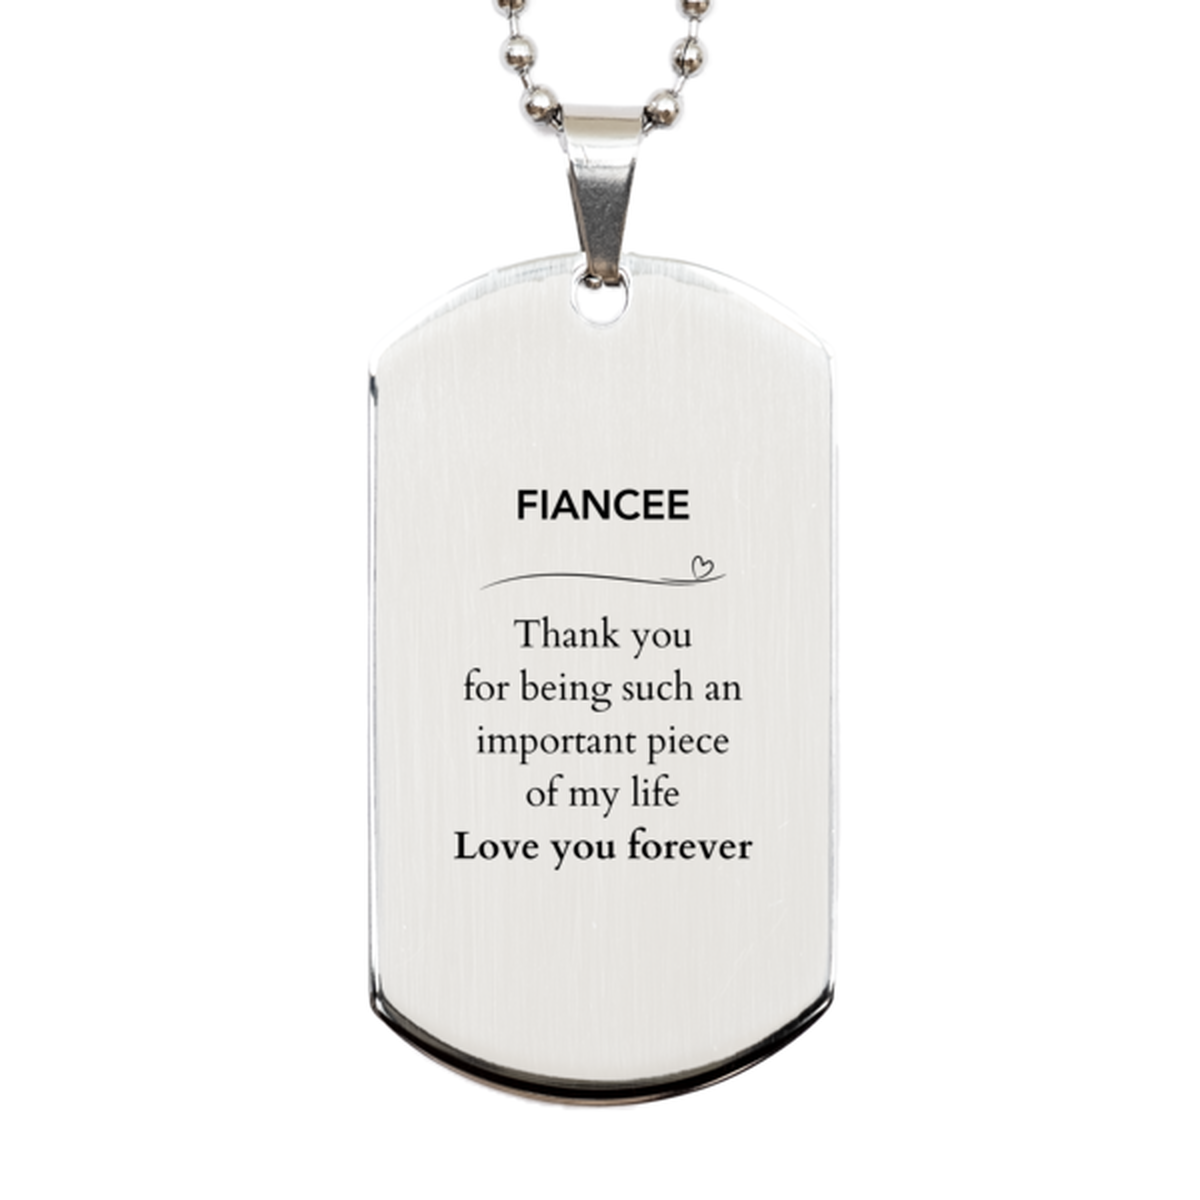 Appropriate Fiancee Silver Dog Tag Epic Birthday Gifts for Fiancee Thank you for being such an important piece of my life Fiancee Christmas Mothers Fathers Day